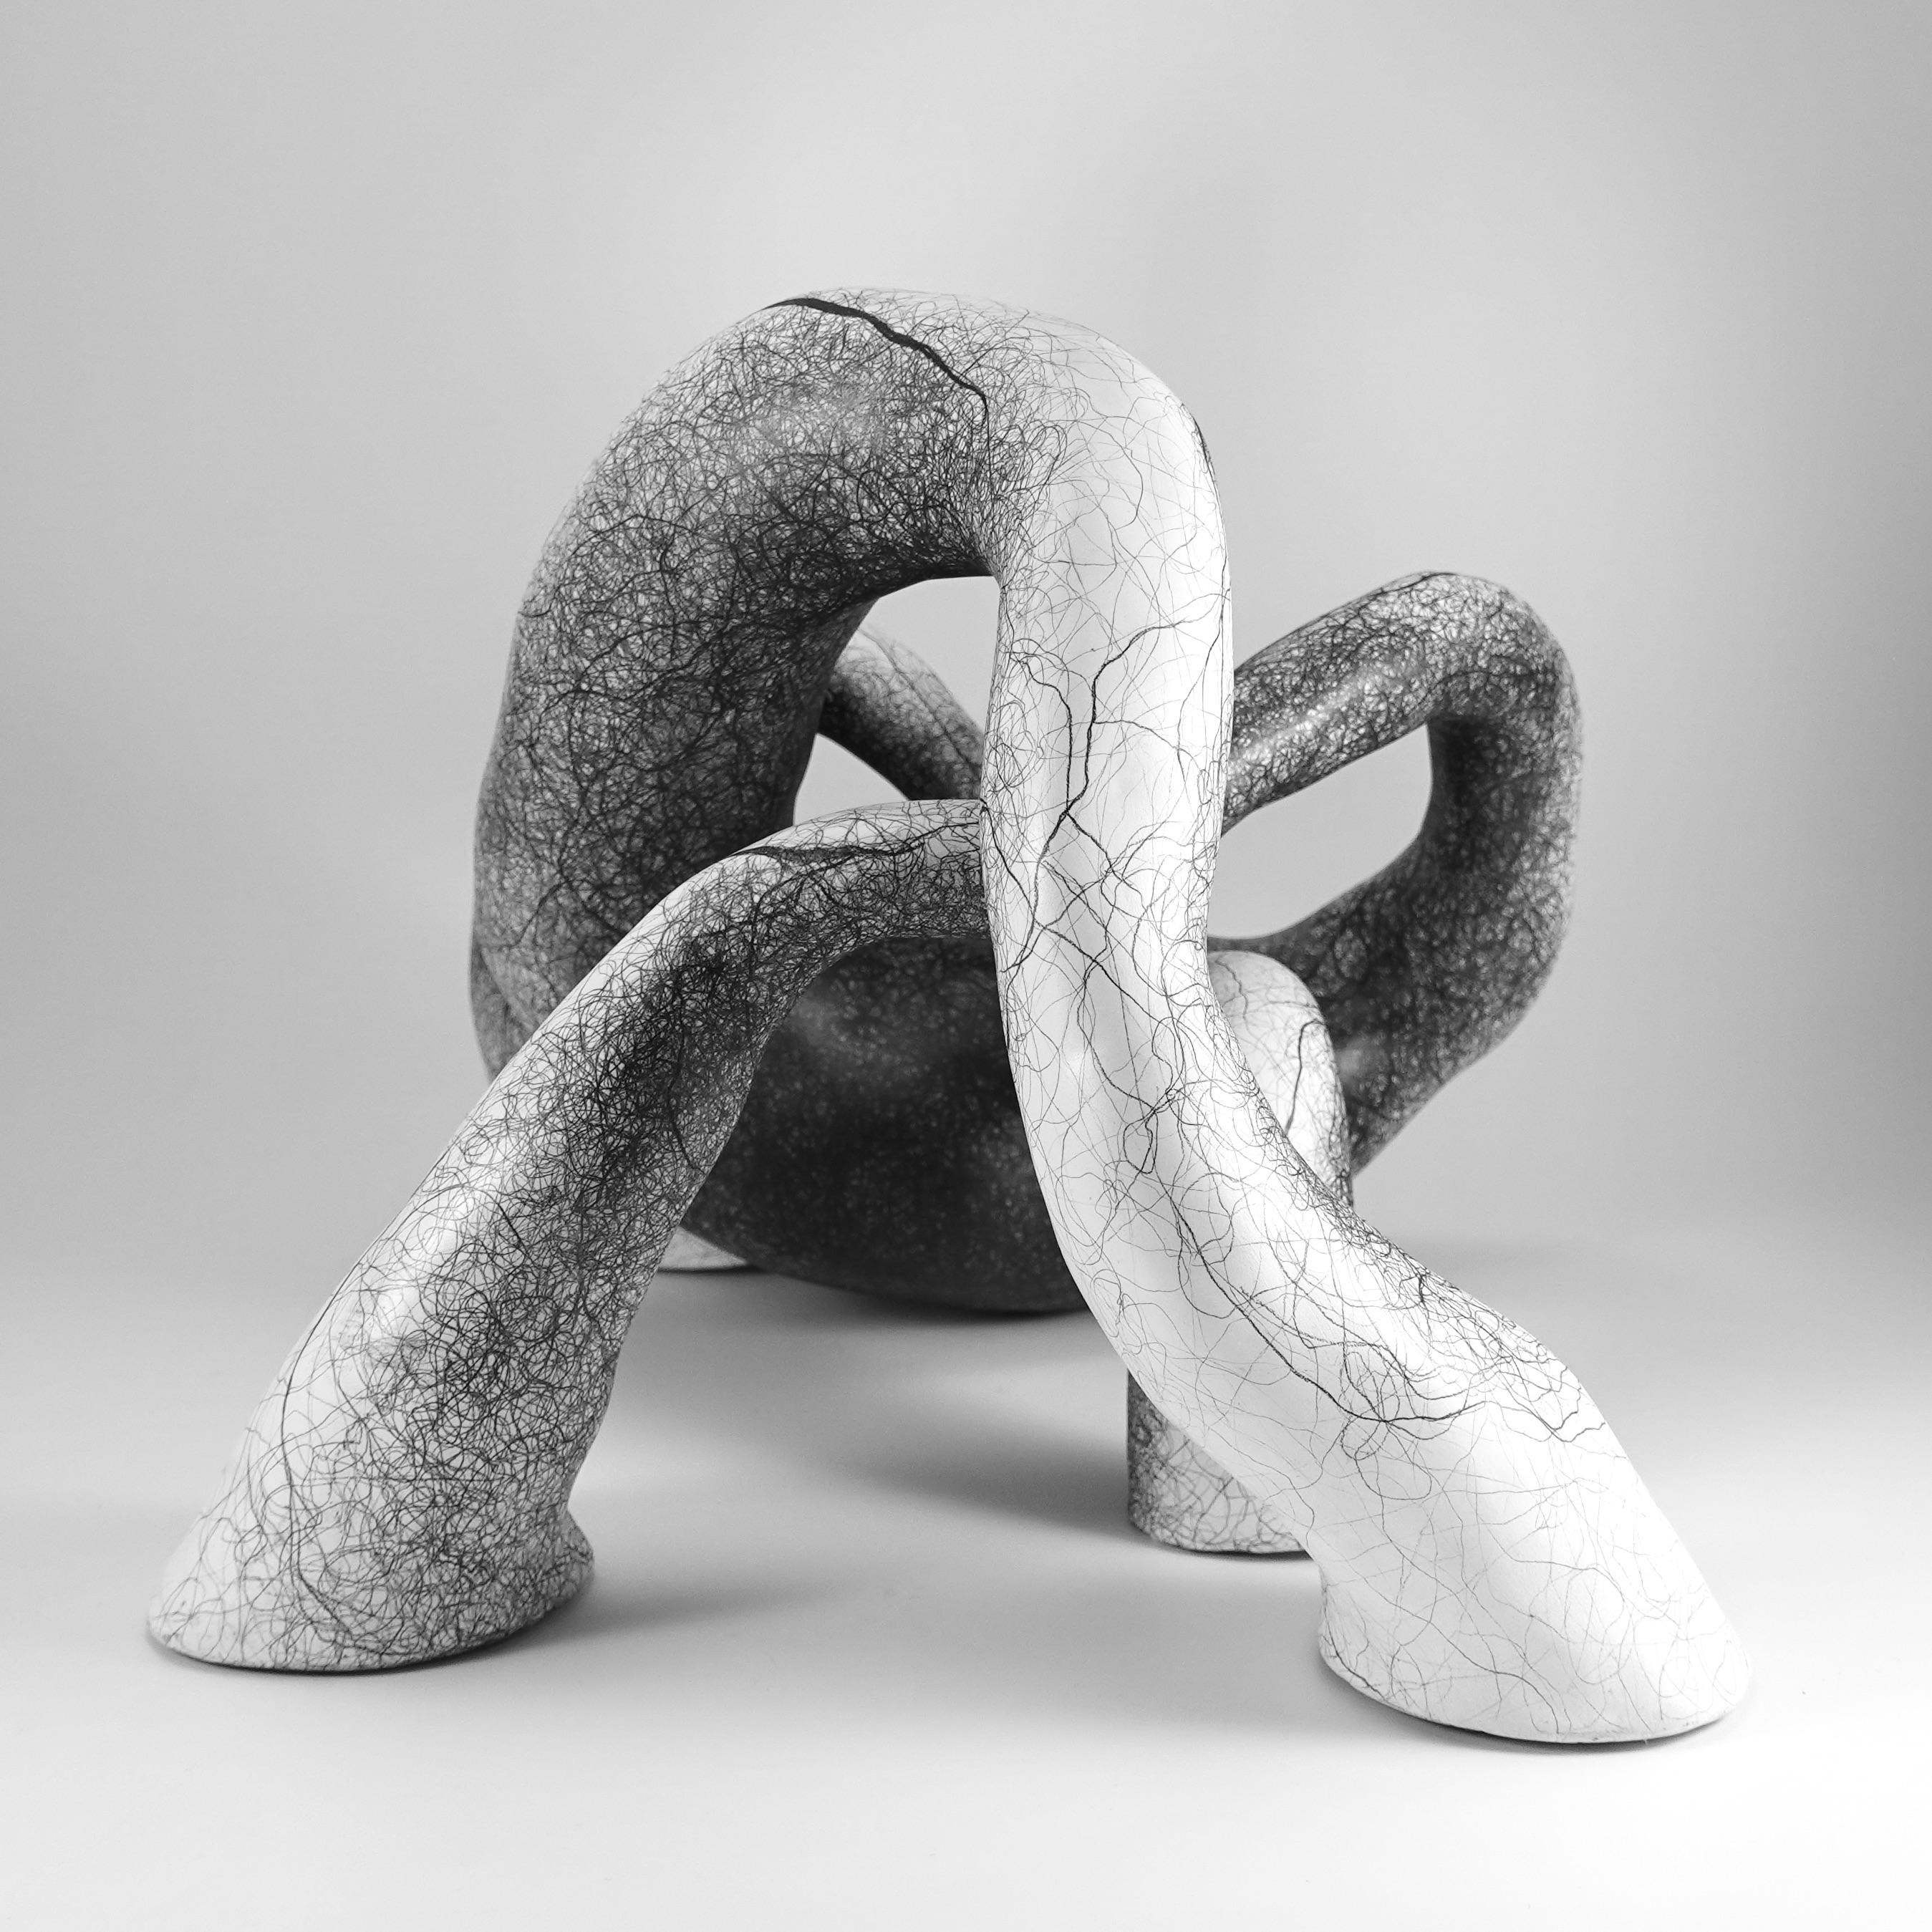 My biomorphic abstractions range from intimate to immersive in scale, referencing our interconnectedness. 
 Building curvilinear ceramic sculpture and then drawing intertwined graphite lines on the surface, creates energy that seems to emanate from